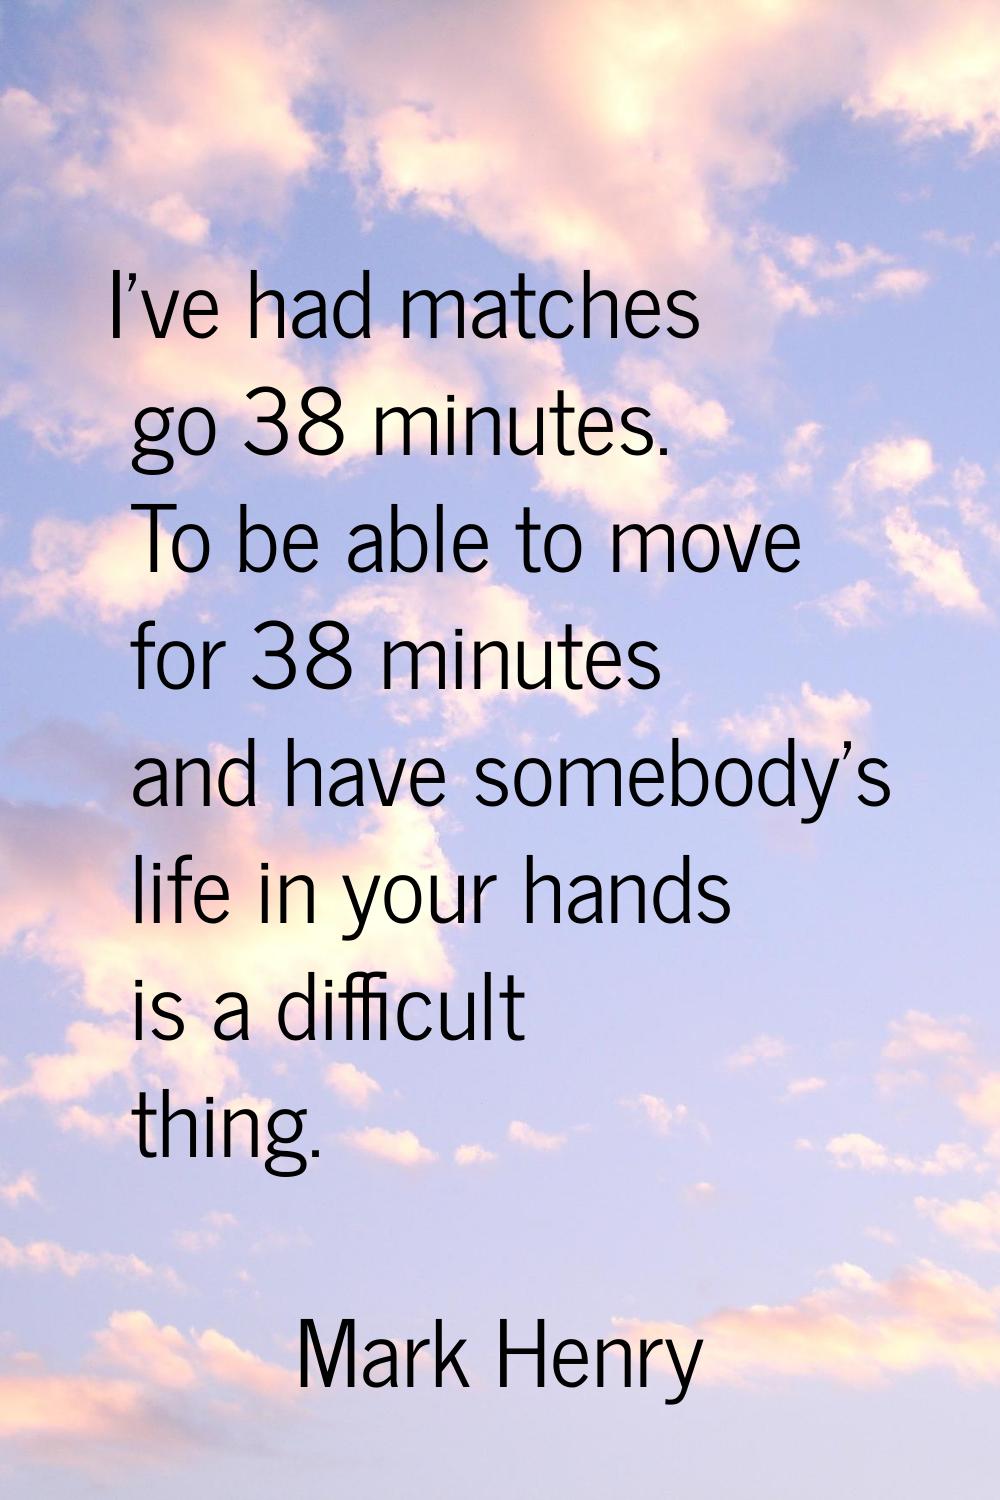 I've had matches go 38 minutes. To be able to move for 38 minutes and have somebody's life in your 